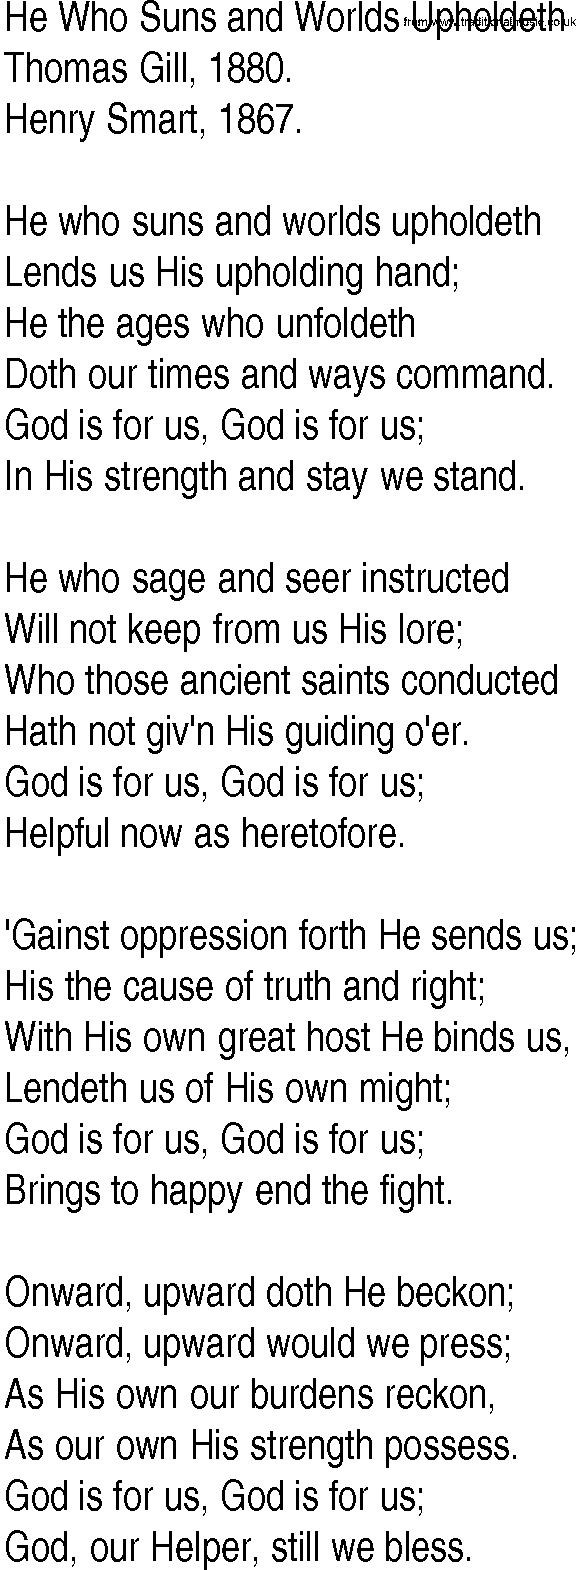 Hymn and Gospel Song: He Who Suns and Worlds Upholdeth by Thomas Gill lyrics